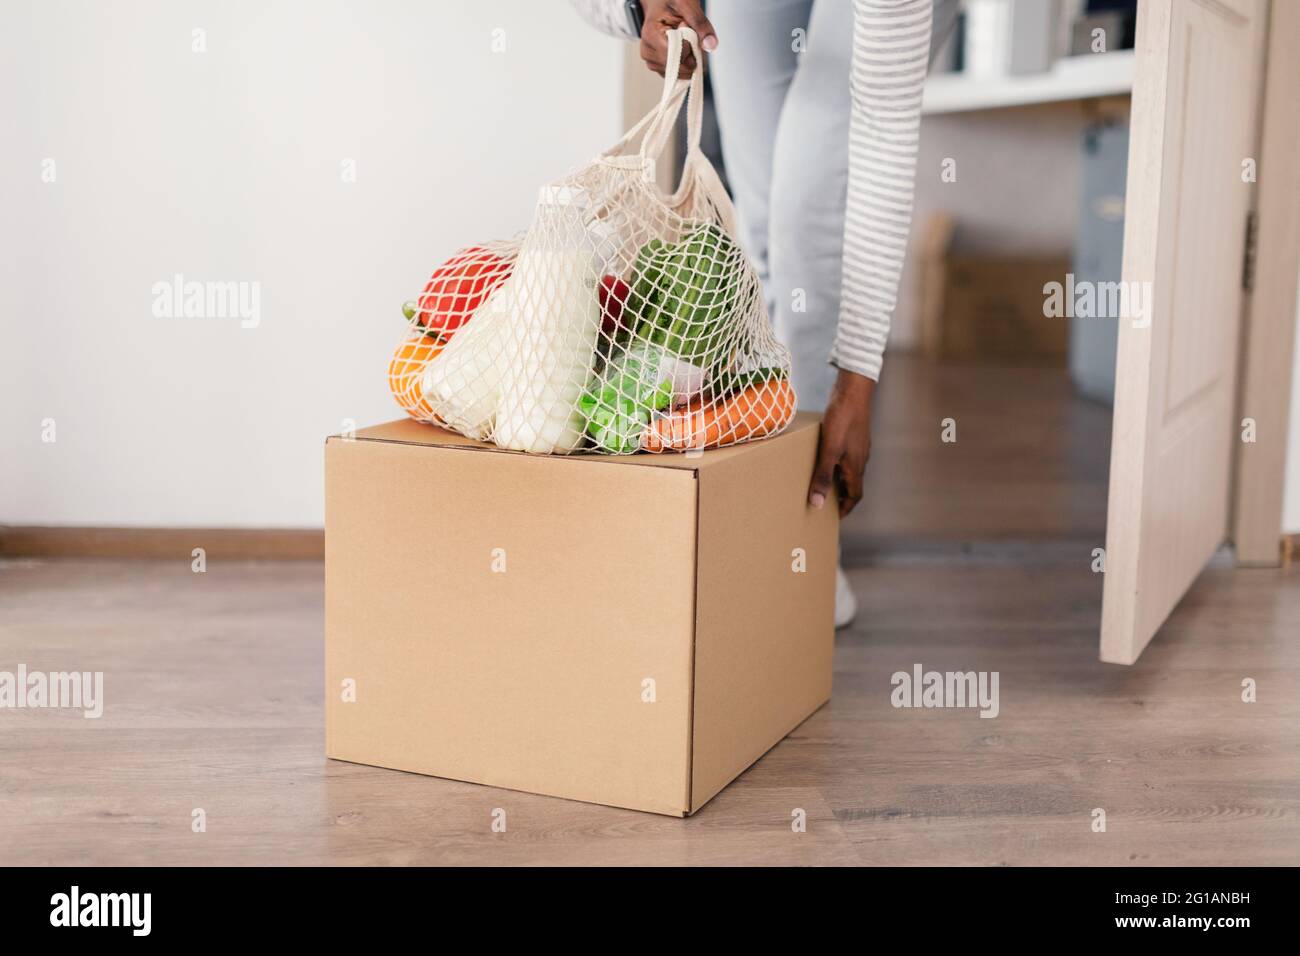 African Woman Carrying Delivered Grocery Shopping Bag And Box Indoors Stock Photo